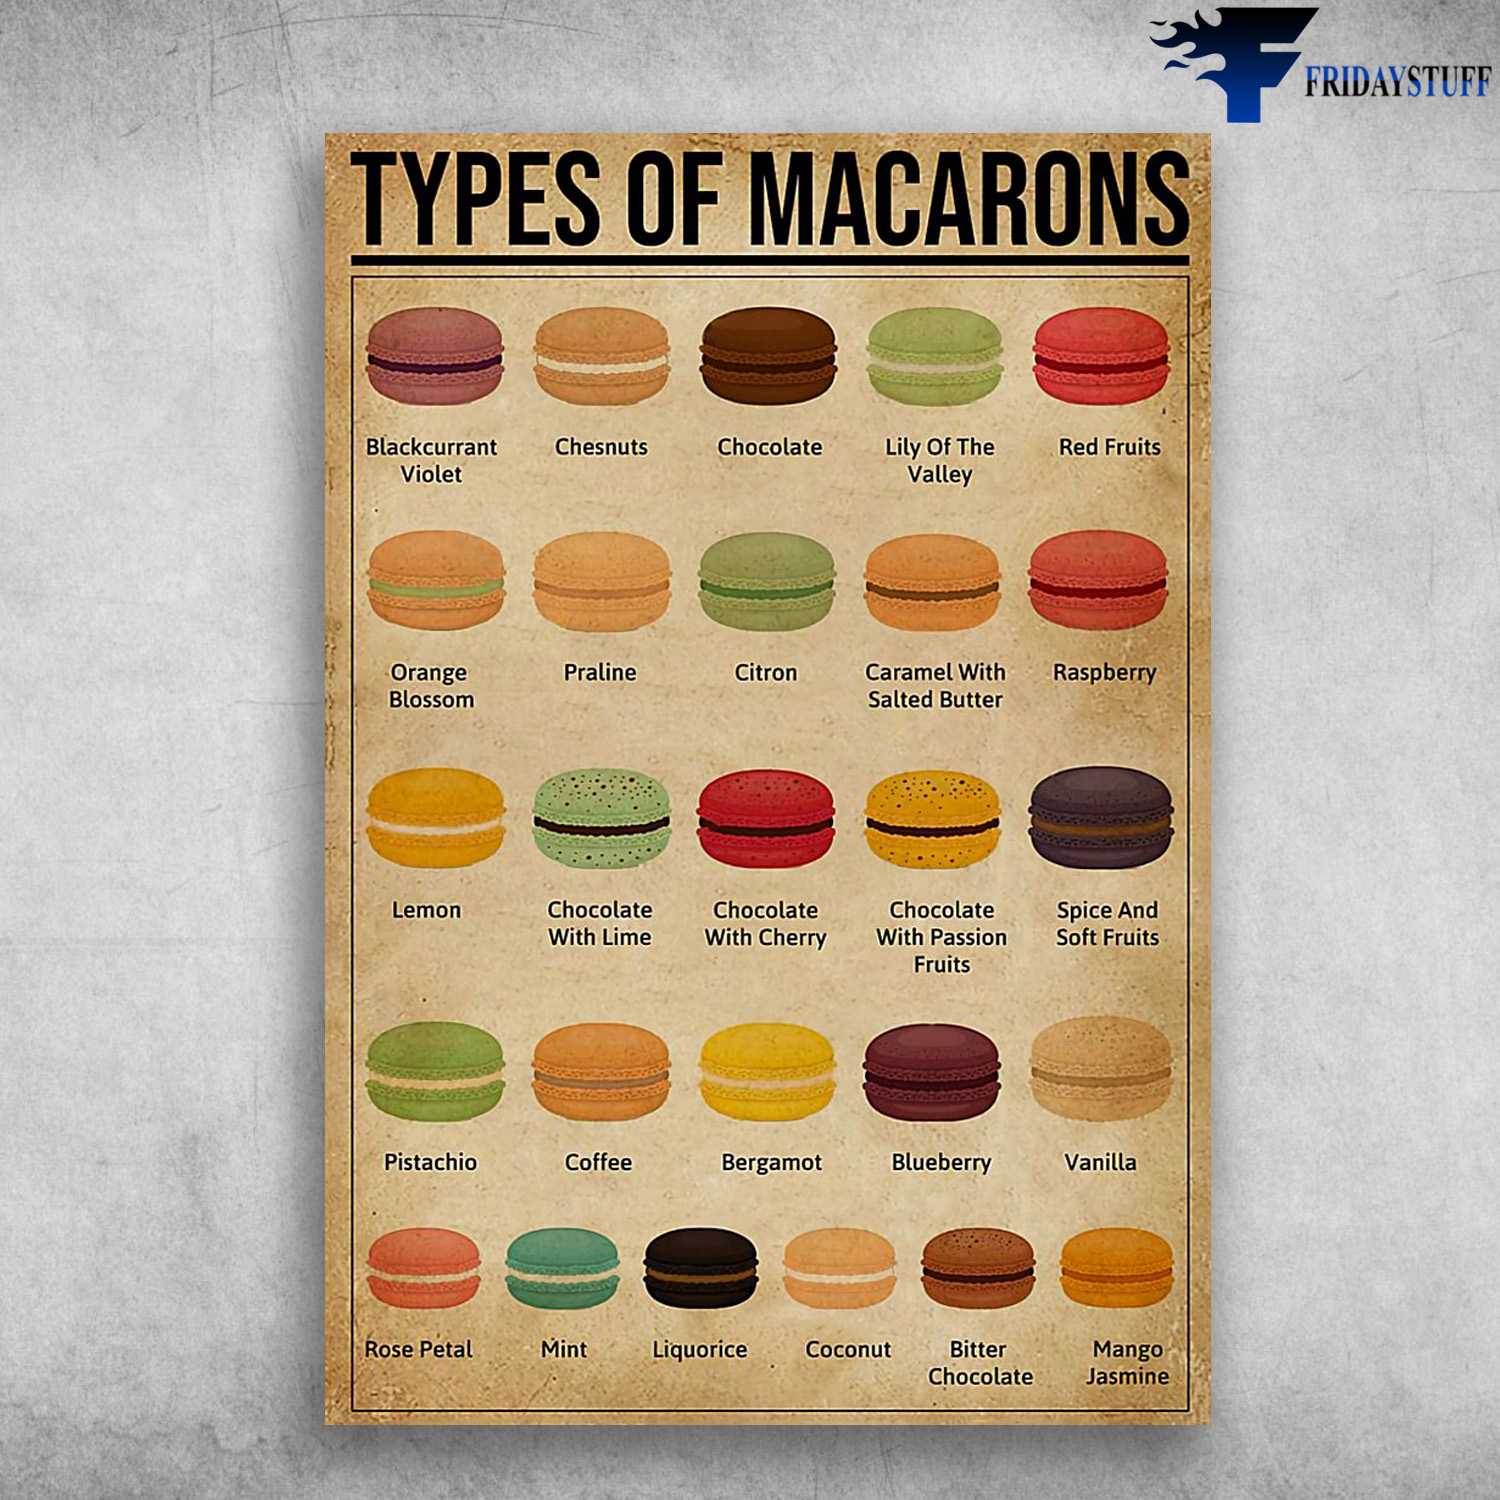 Macarons Knowledge, Types Of Macarons, Blackcurrant Violet, Chestnuts, Chocolate, Lily Of The Valley, Red Fruits